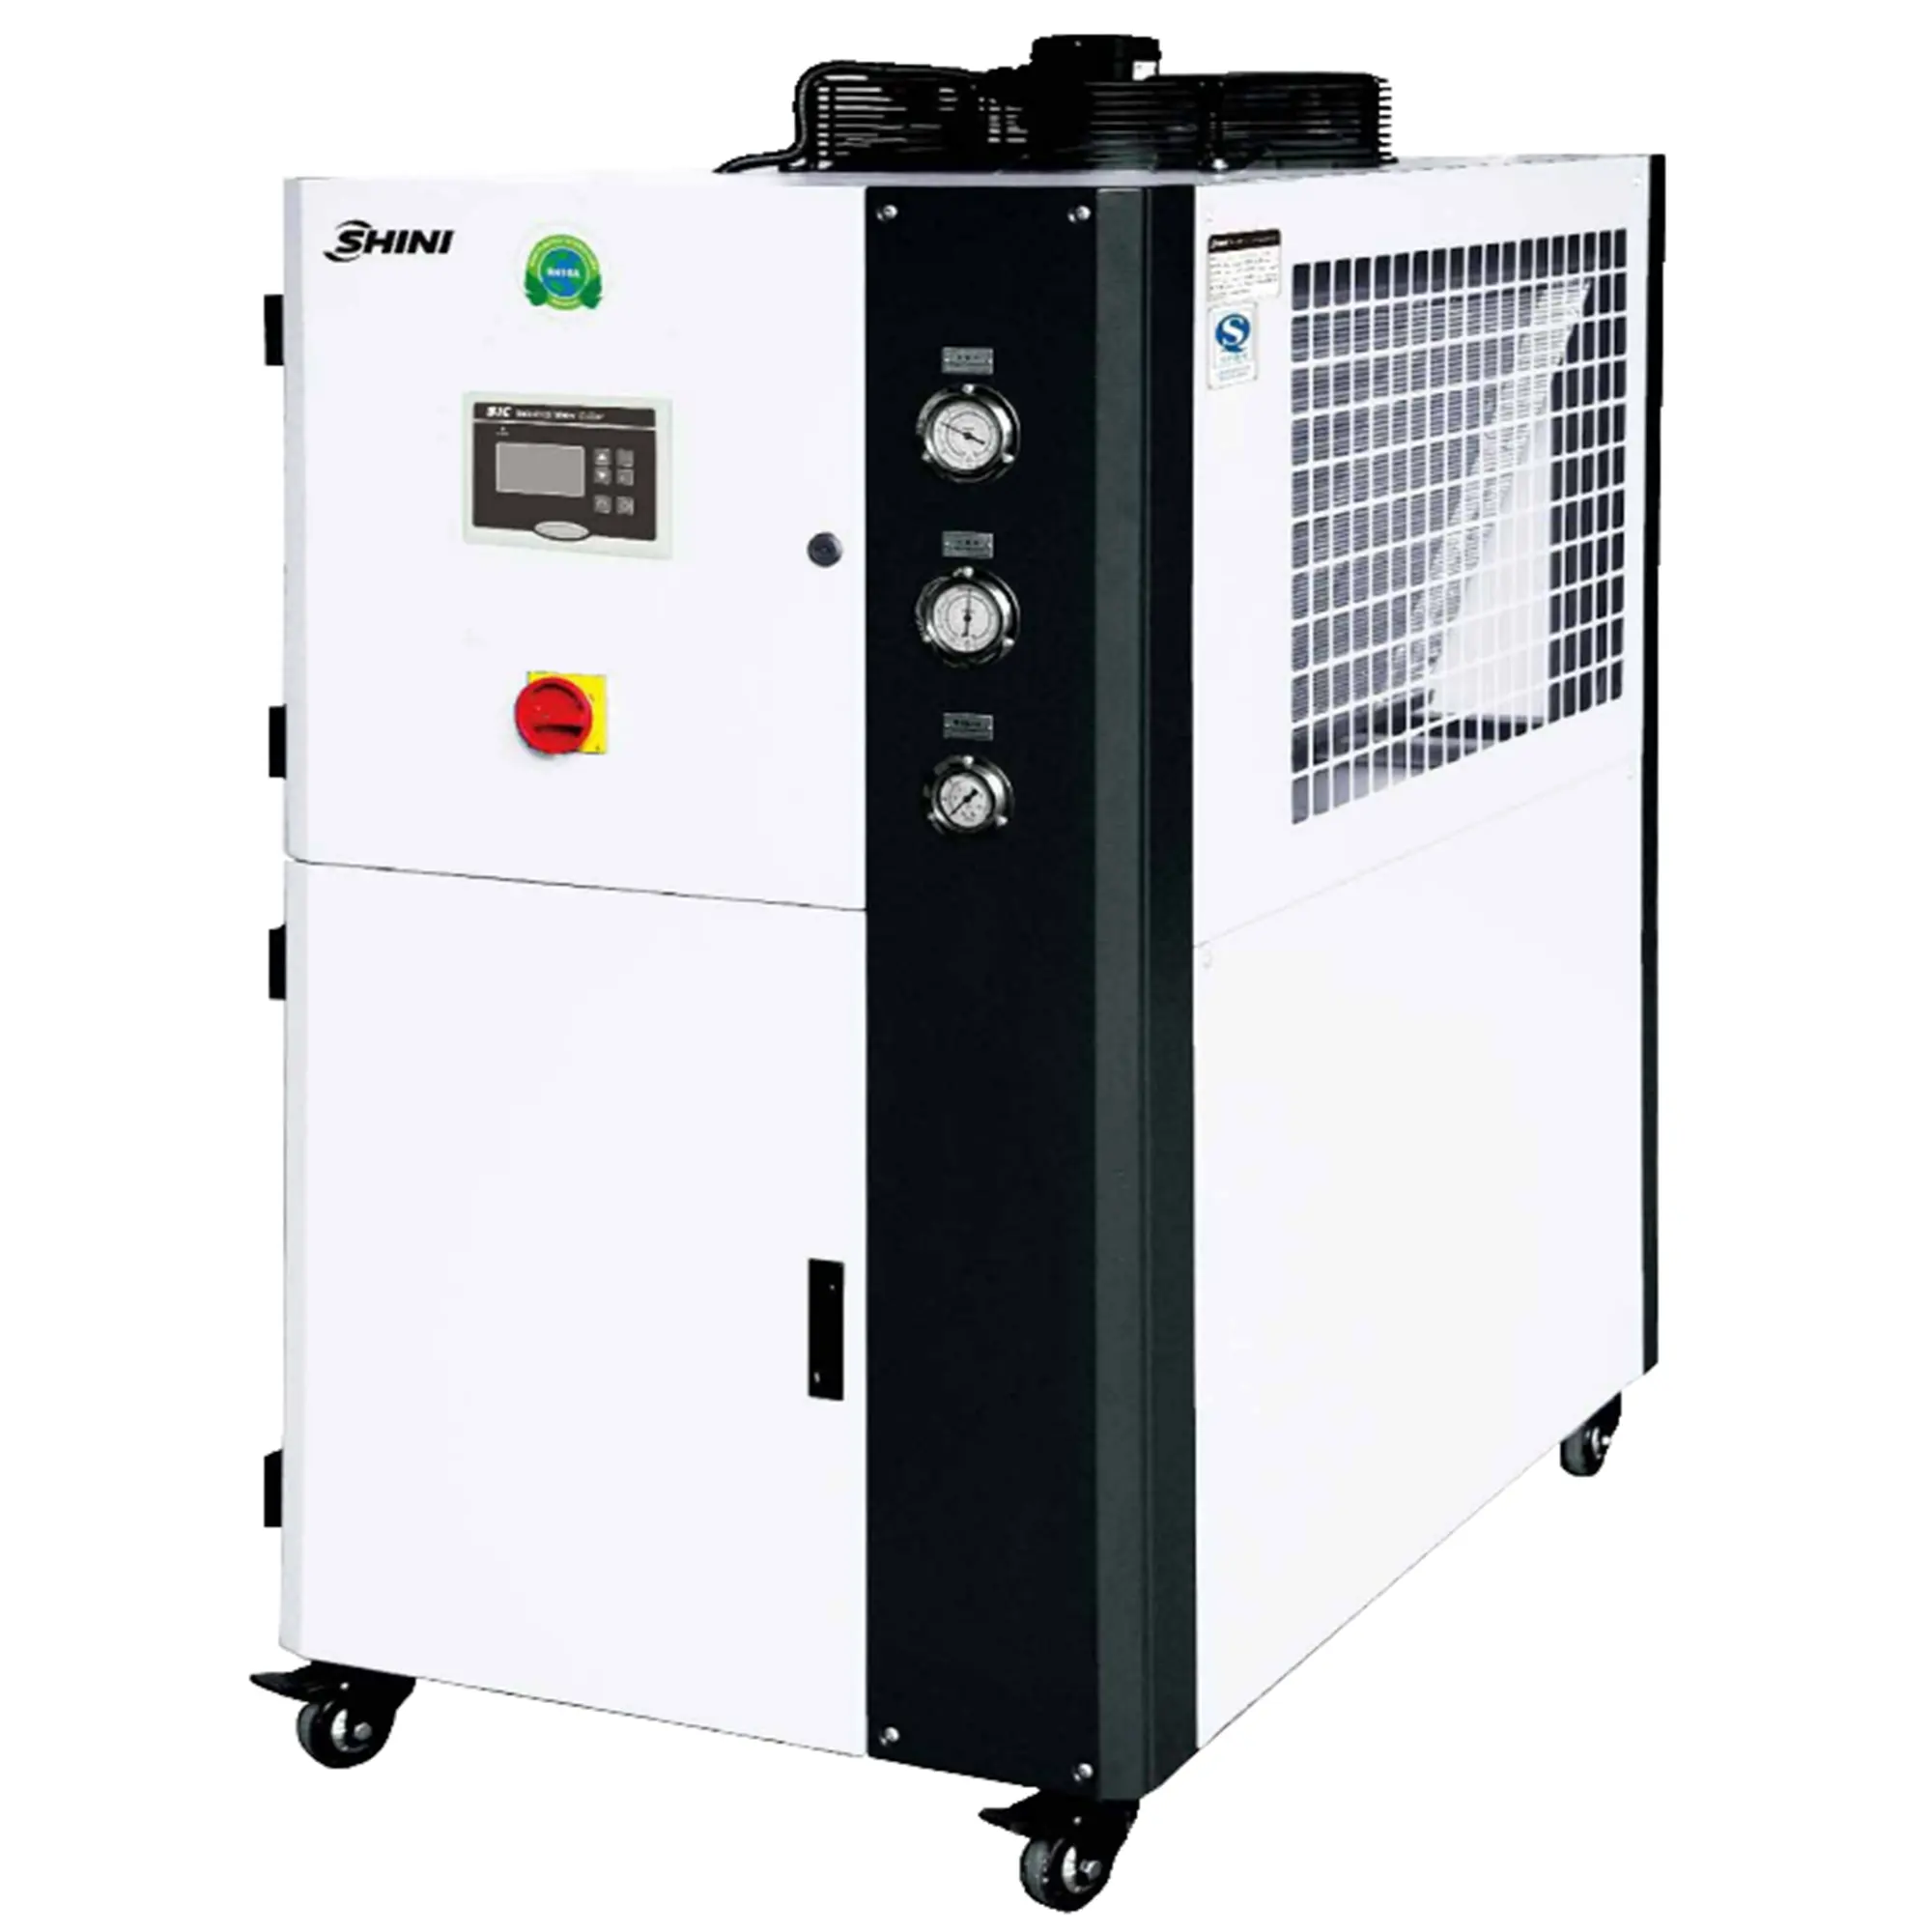 SHINI industry chiller air cooled for injection molding machine Water cooling chiller shini 10 hp for injection machine